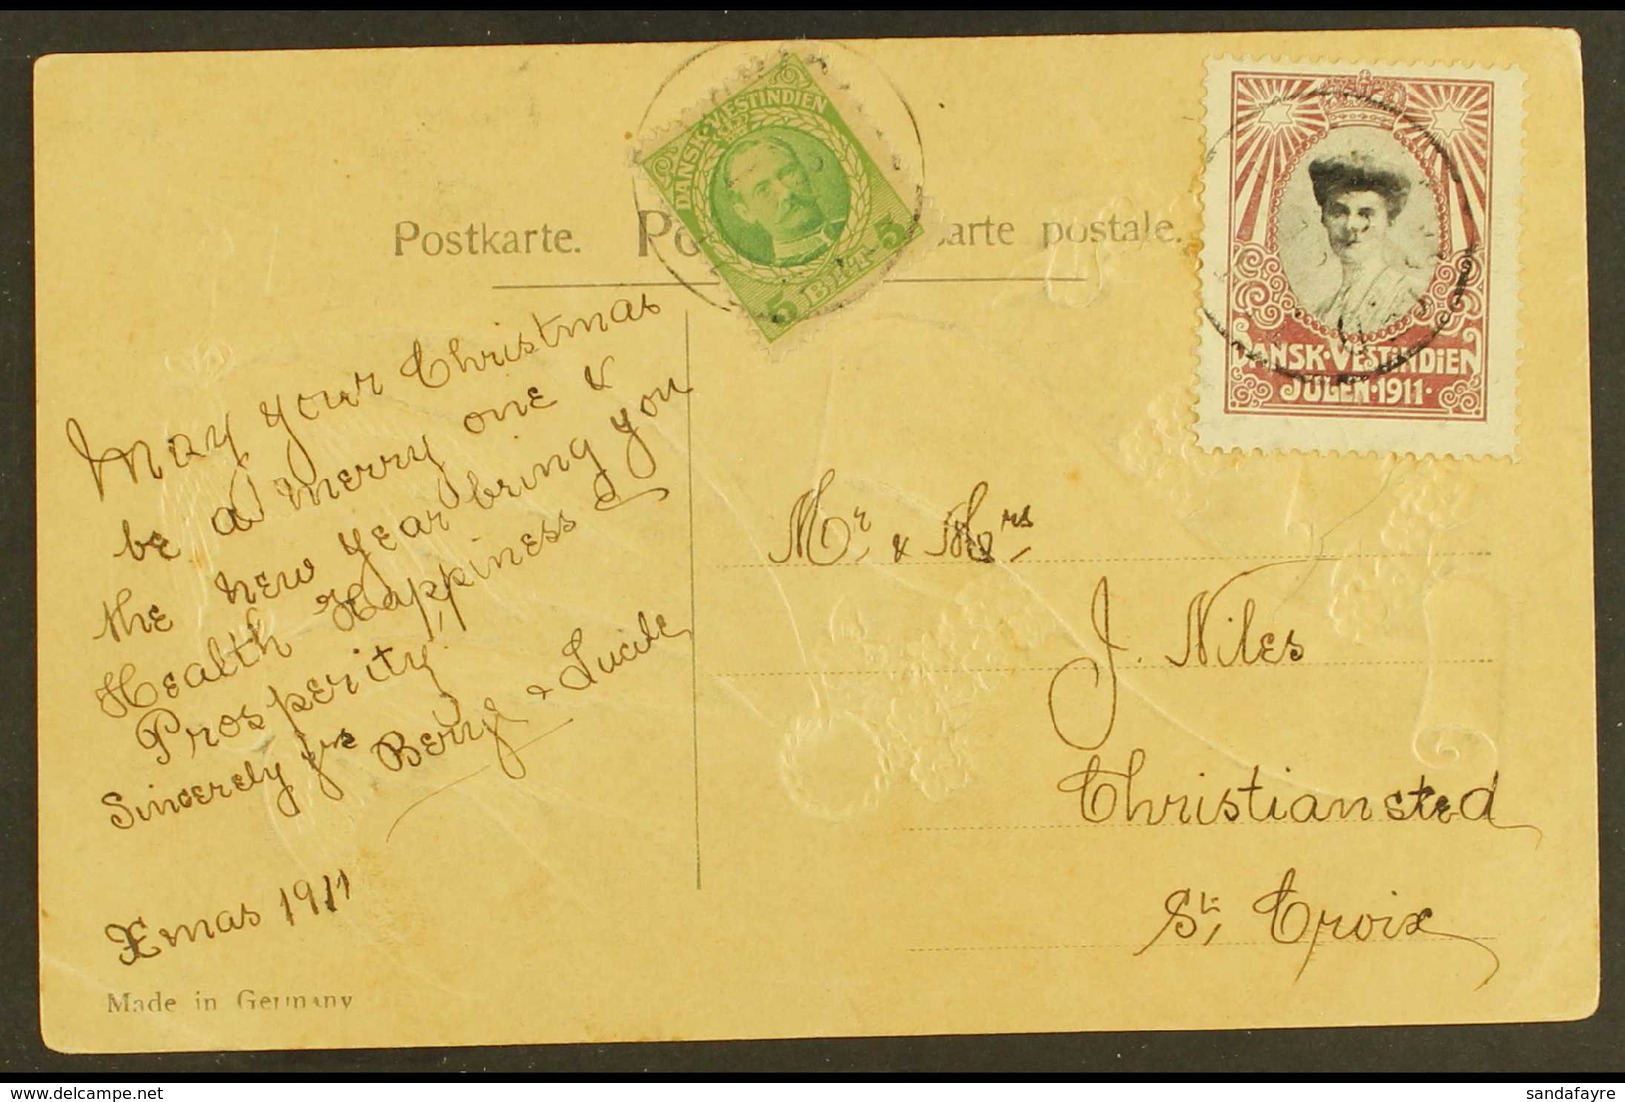 1911 CHRISTMAS SEAL USED ON POSTCARD  1911 Locally Addressed Embossed "Good Wishes" Postcard Bearing 5b Green Frederik V - Dänisch-Westindien